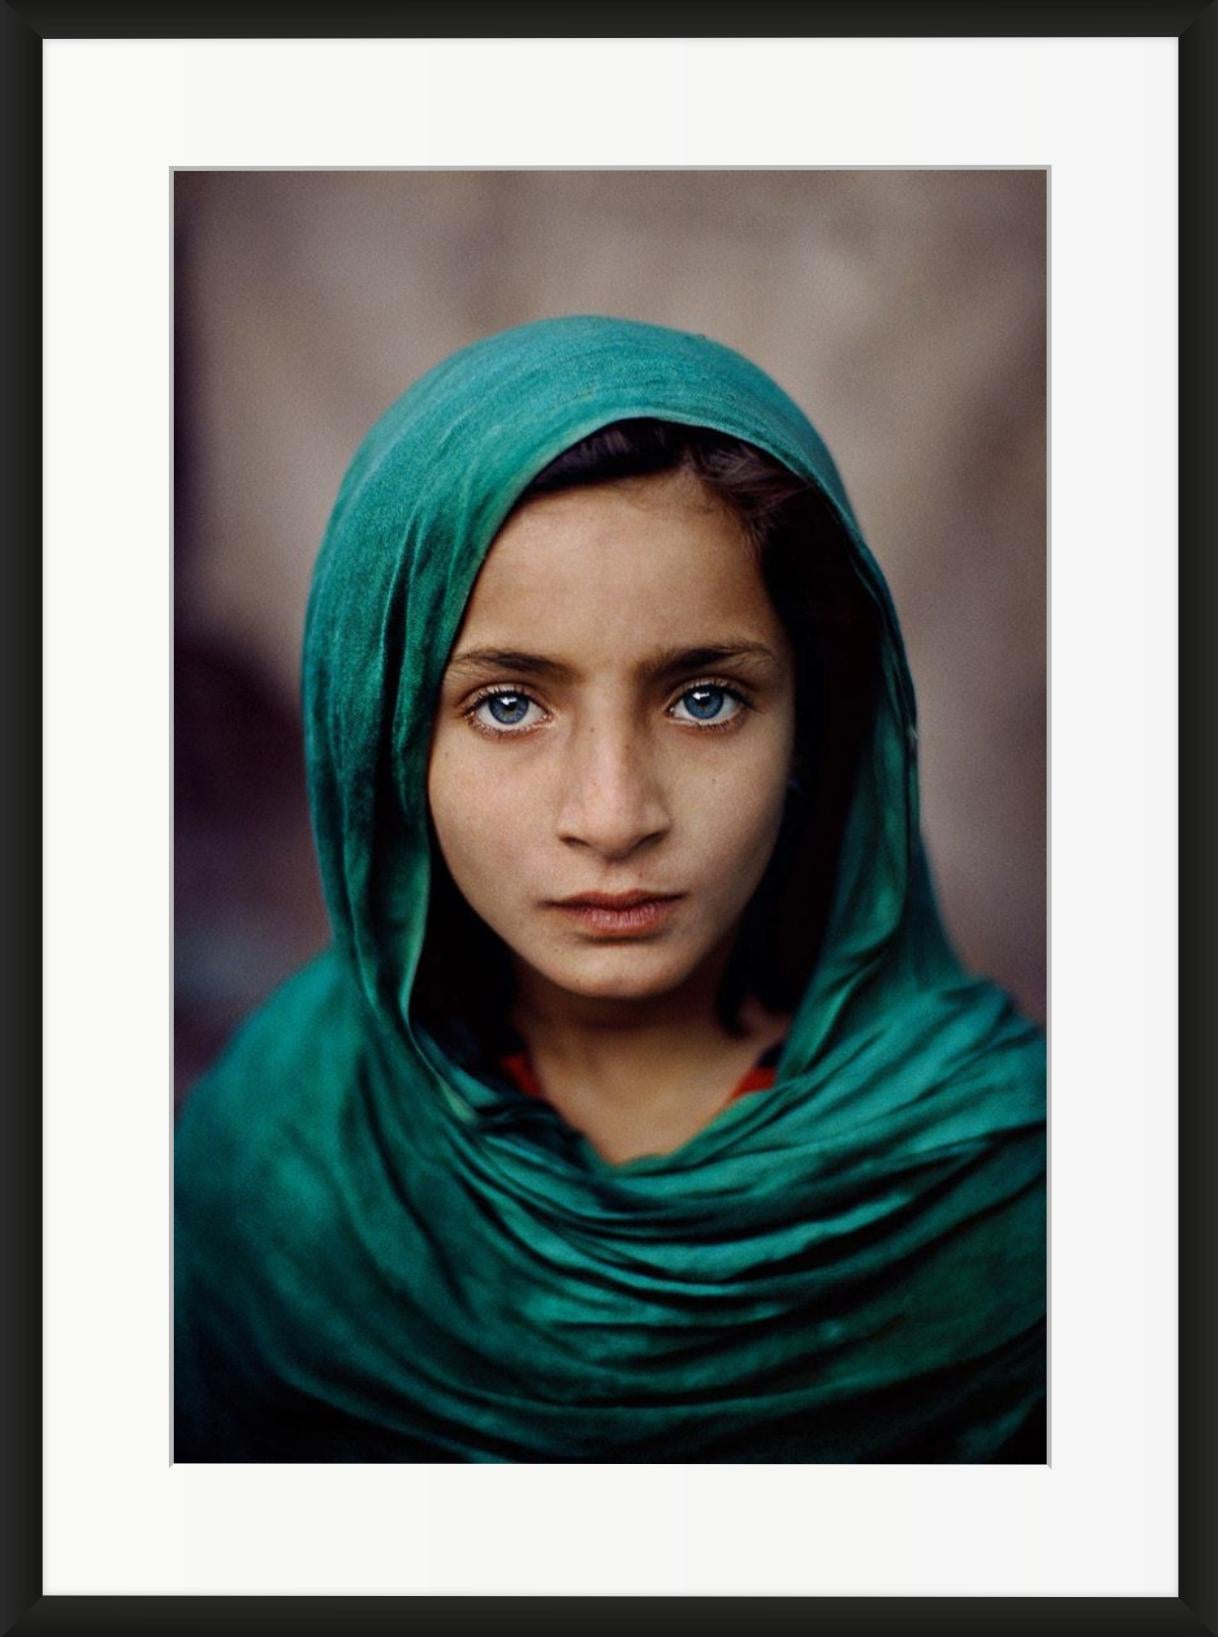 Girl with Green Shawl, Peshawar, Pakistan - Photograph by Steve McCurry